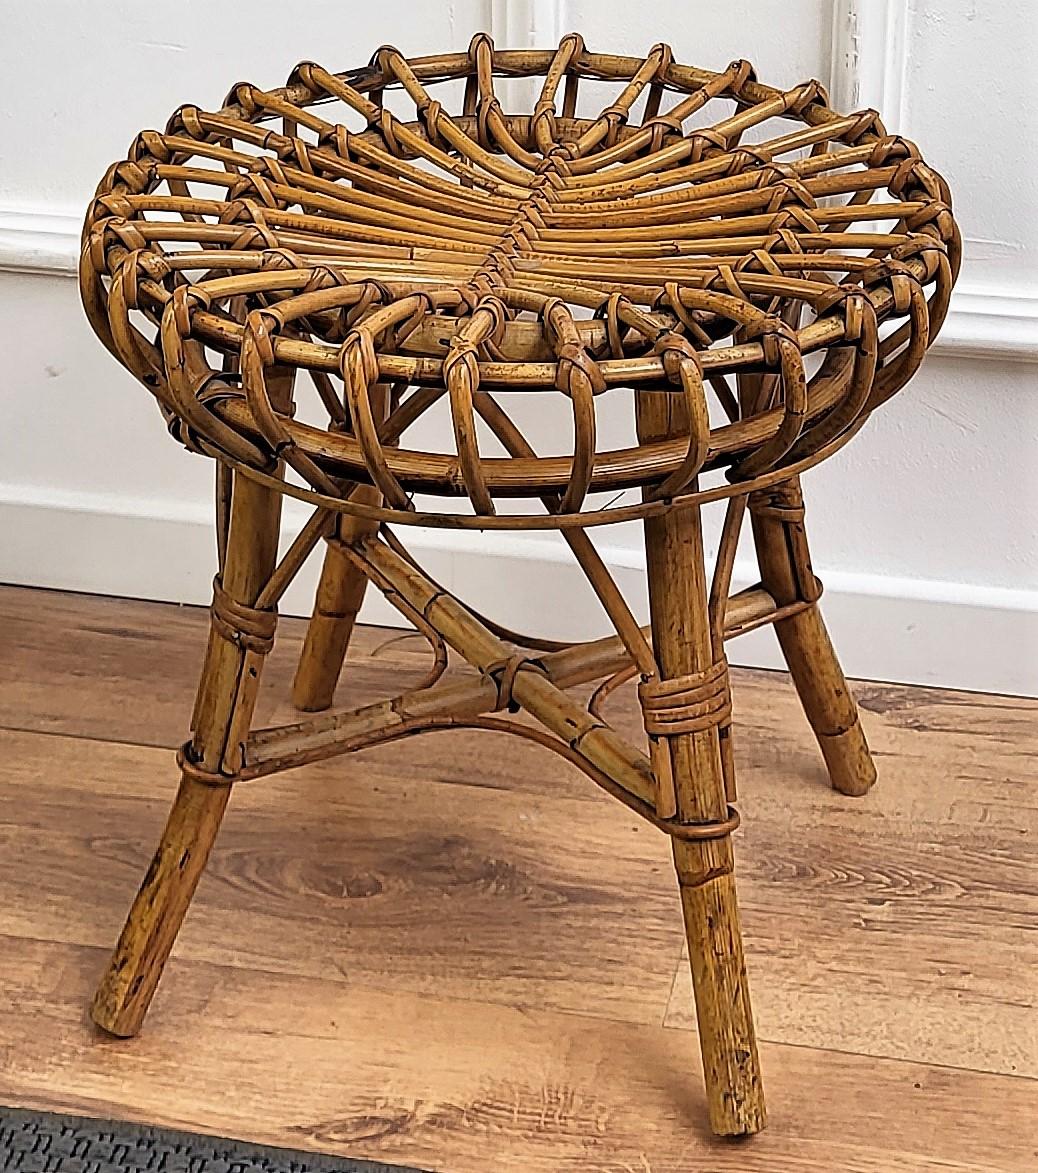 Midcentury round bamboo and wicker ottoman stool. This pouf was designed by Franco Albini in Italy during the 1960s.

This piece is fantastic as the rattan is shaped in a unique way, biggest canes composing the structure while the top part is made